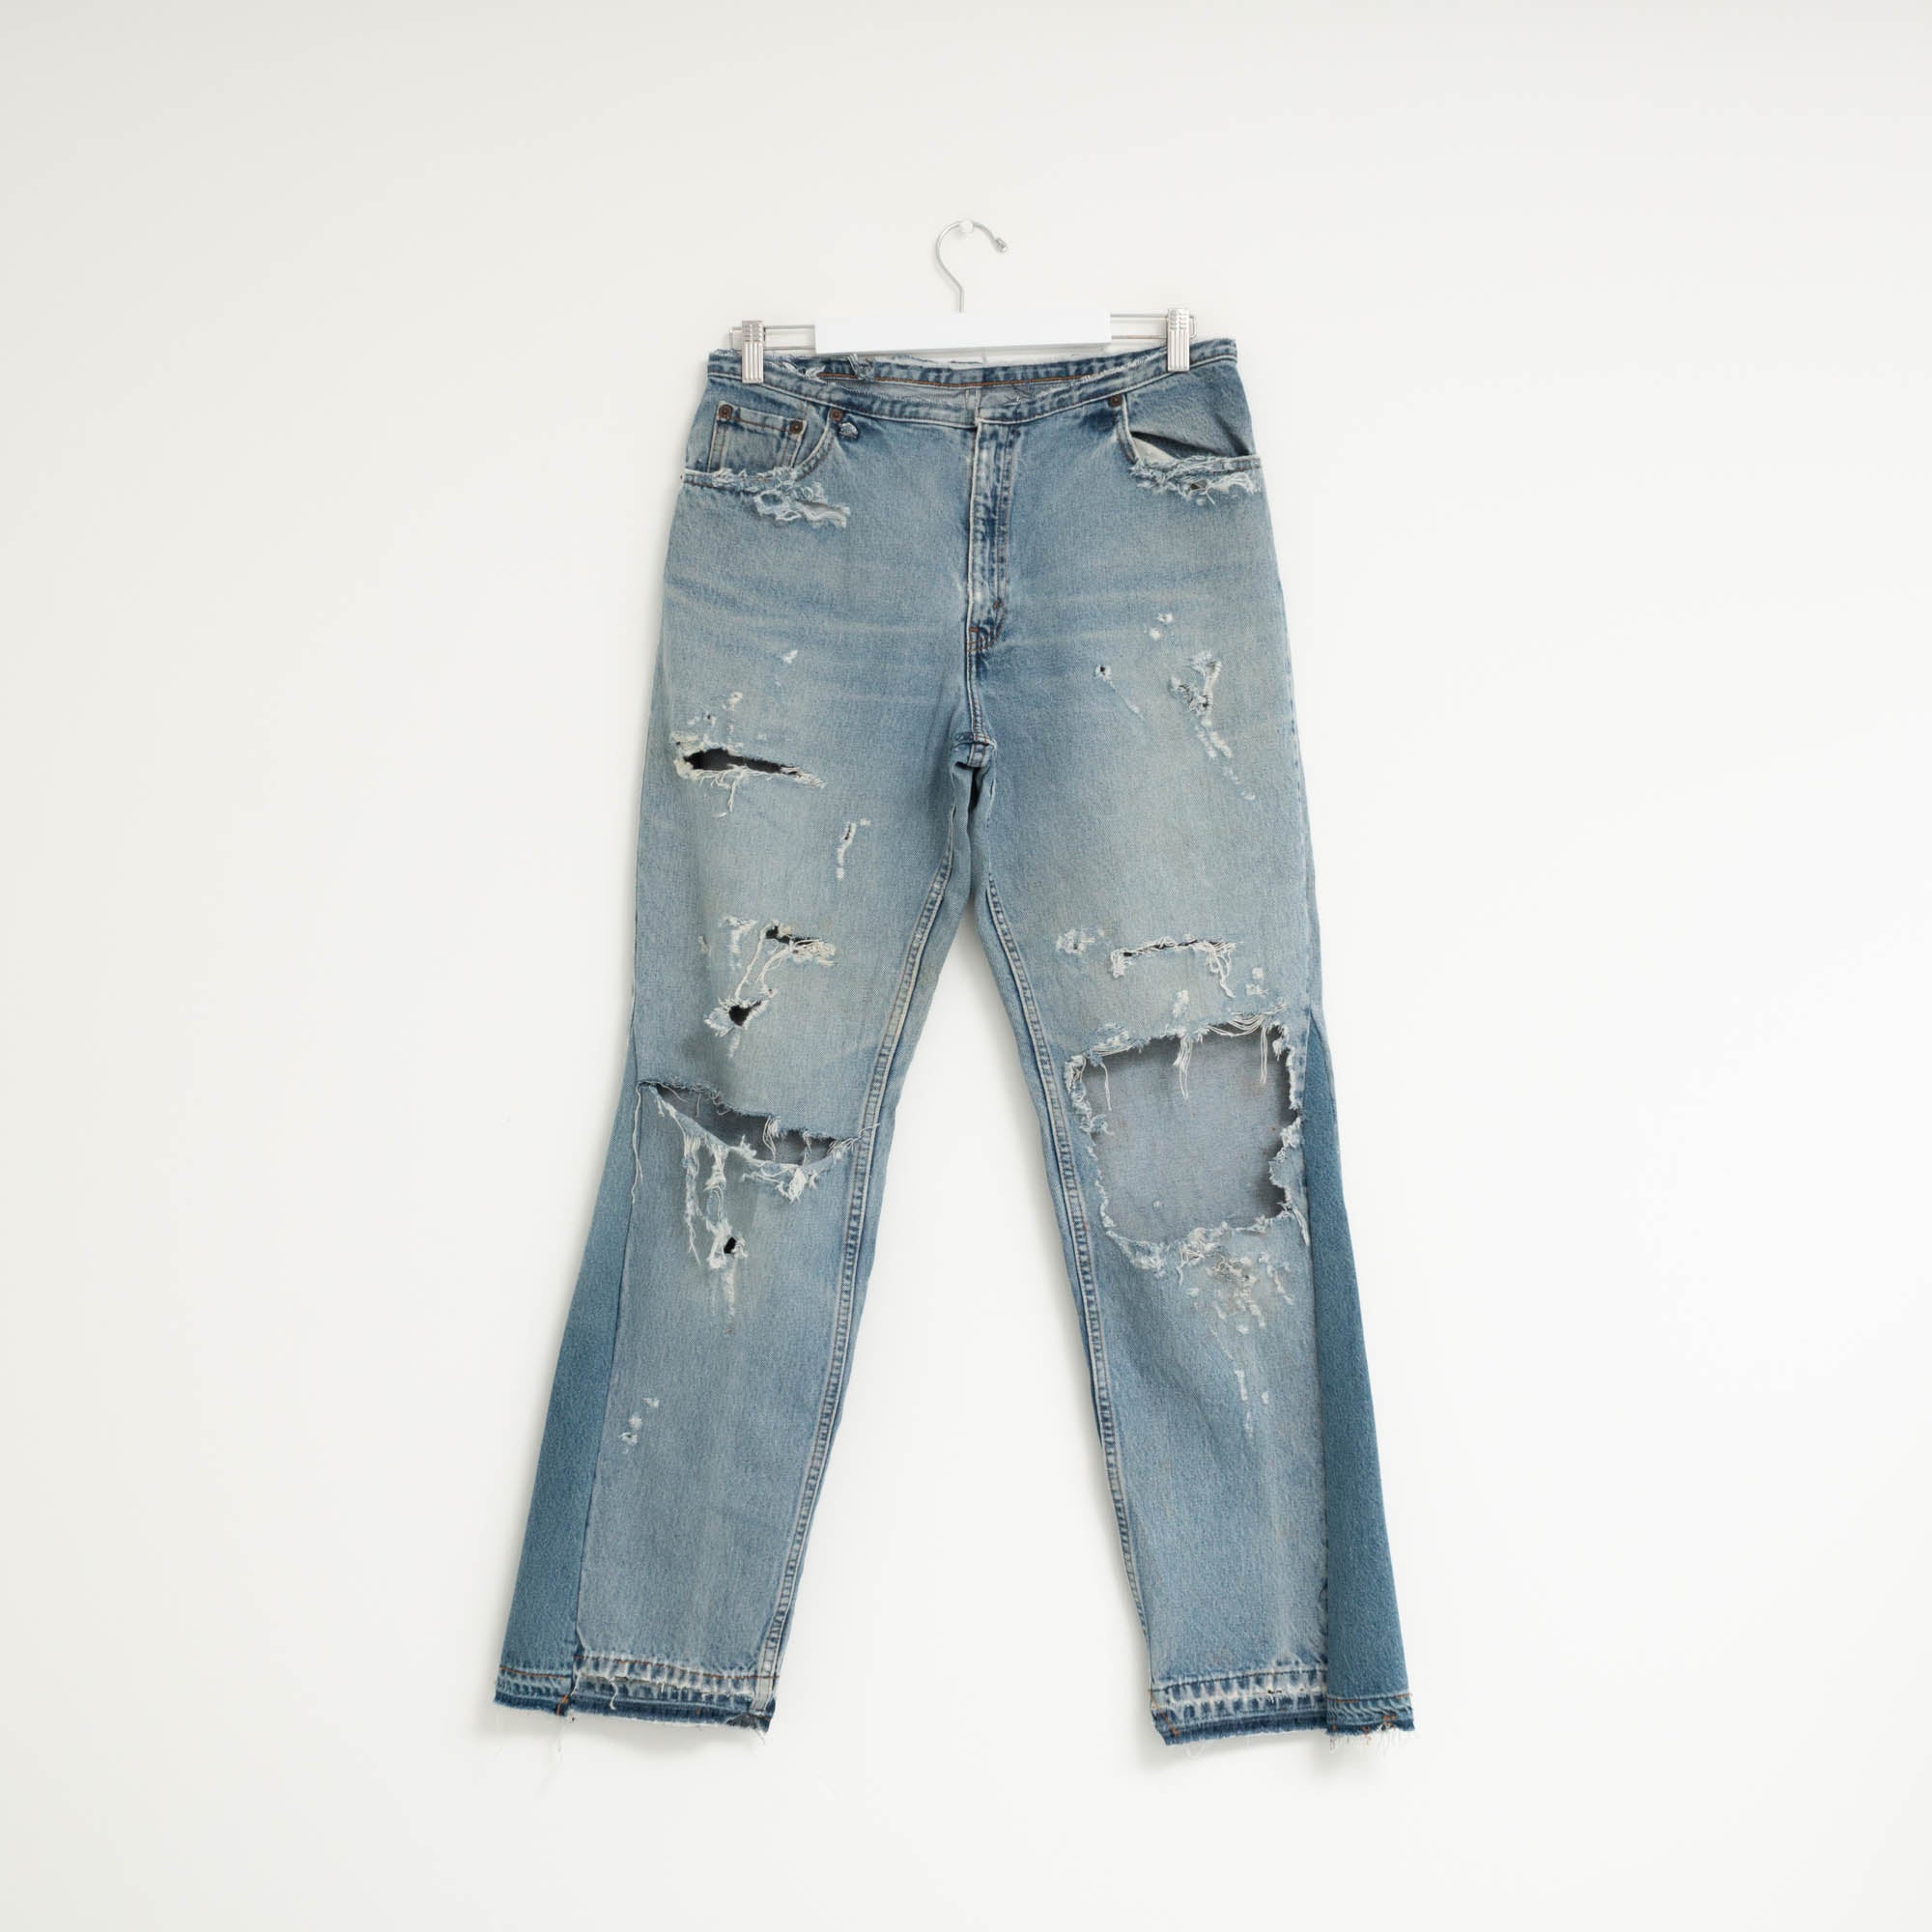 "FLARE" Jeans W33 L32